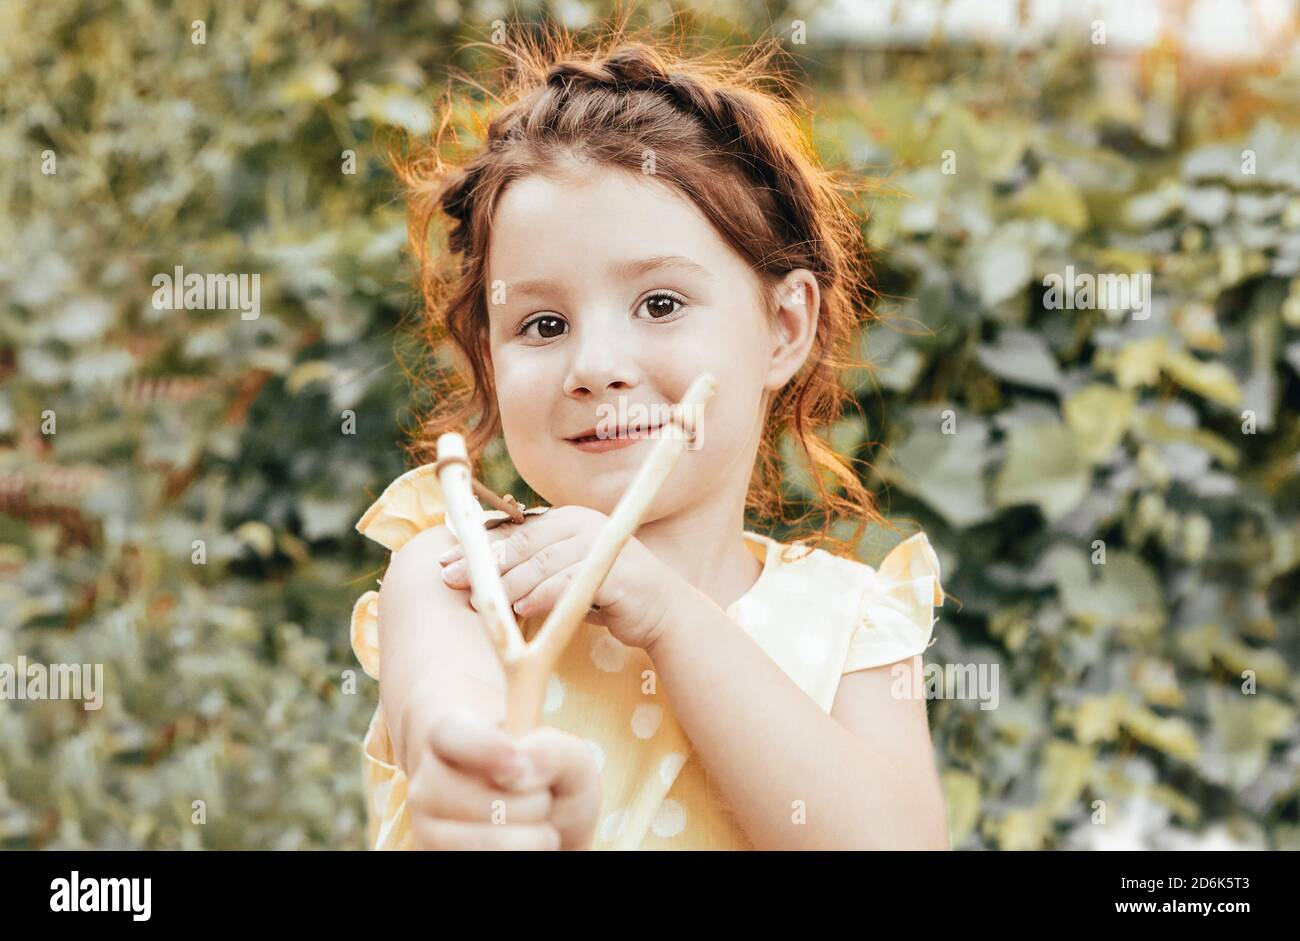 Cute naughty redhead little girl with braided hair aiming with slingshot at camera while spending summer day in garden Stock Photo